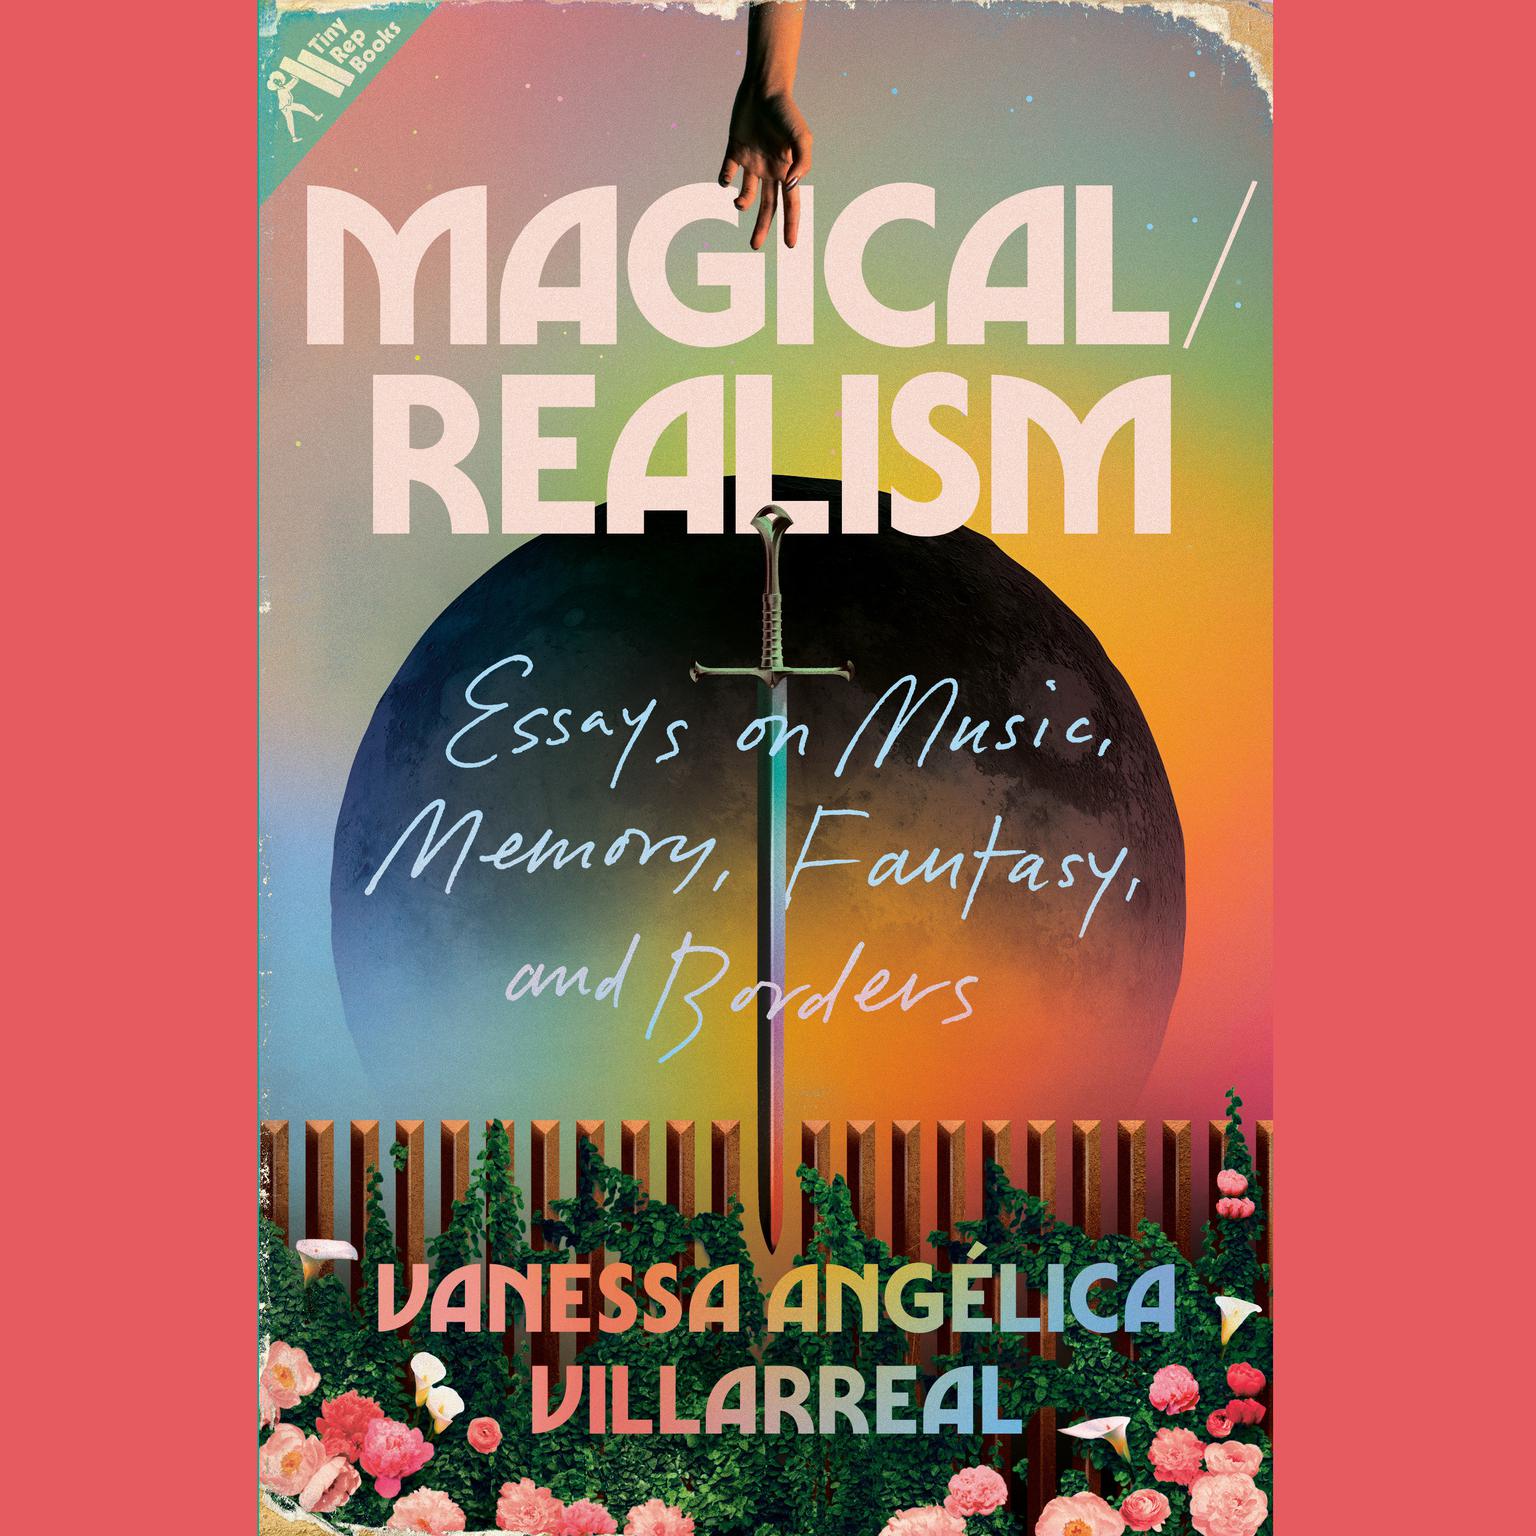 Magical/Realism: Essays on Music, Memory, Fantasy, and Borders Audiobook, by Vanessa Angélica Villarreal